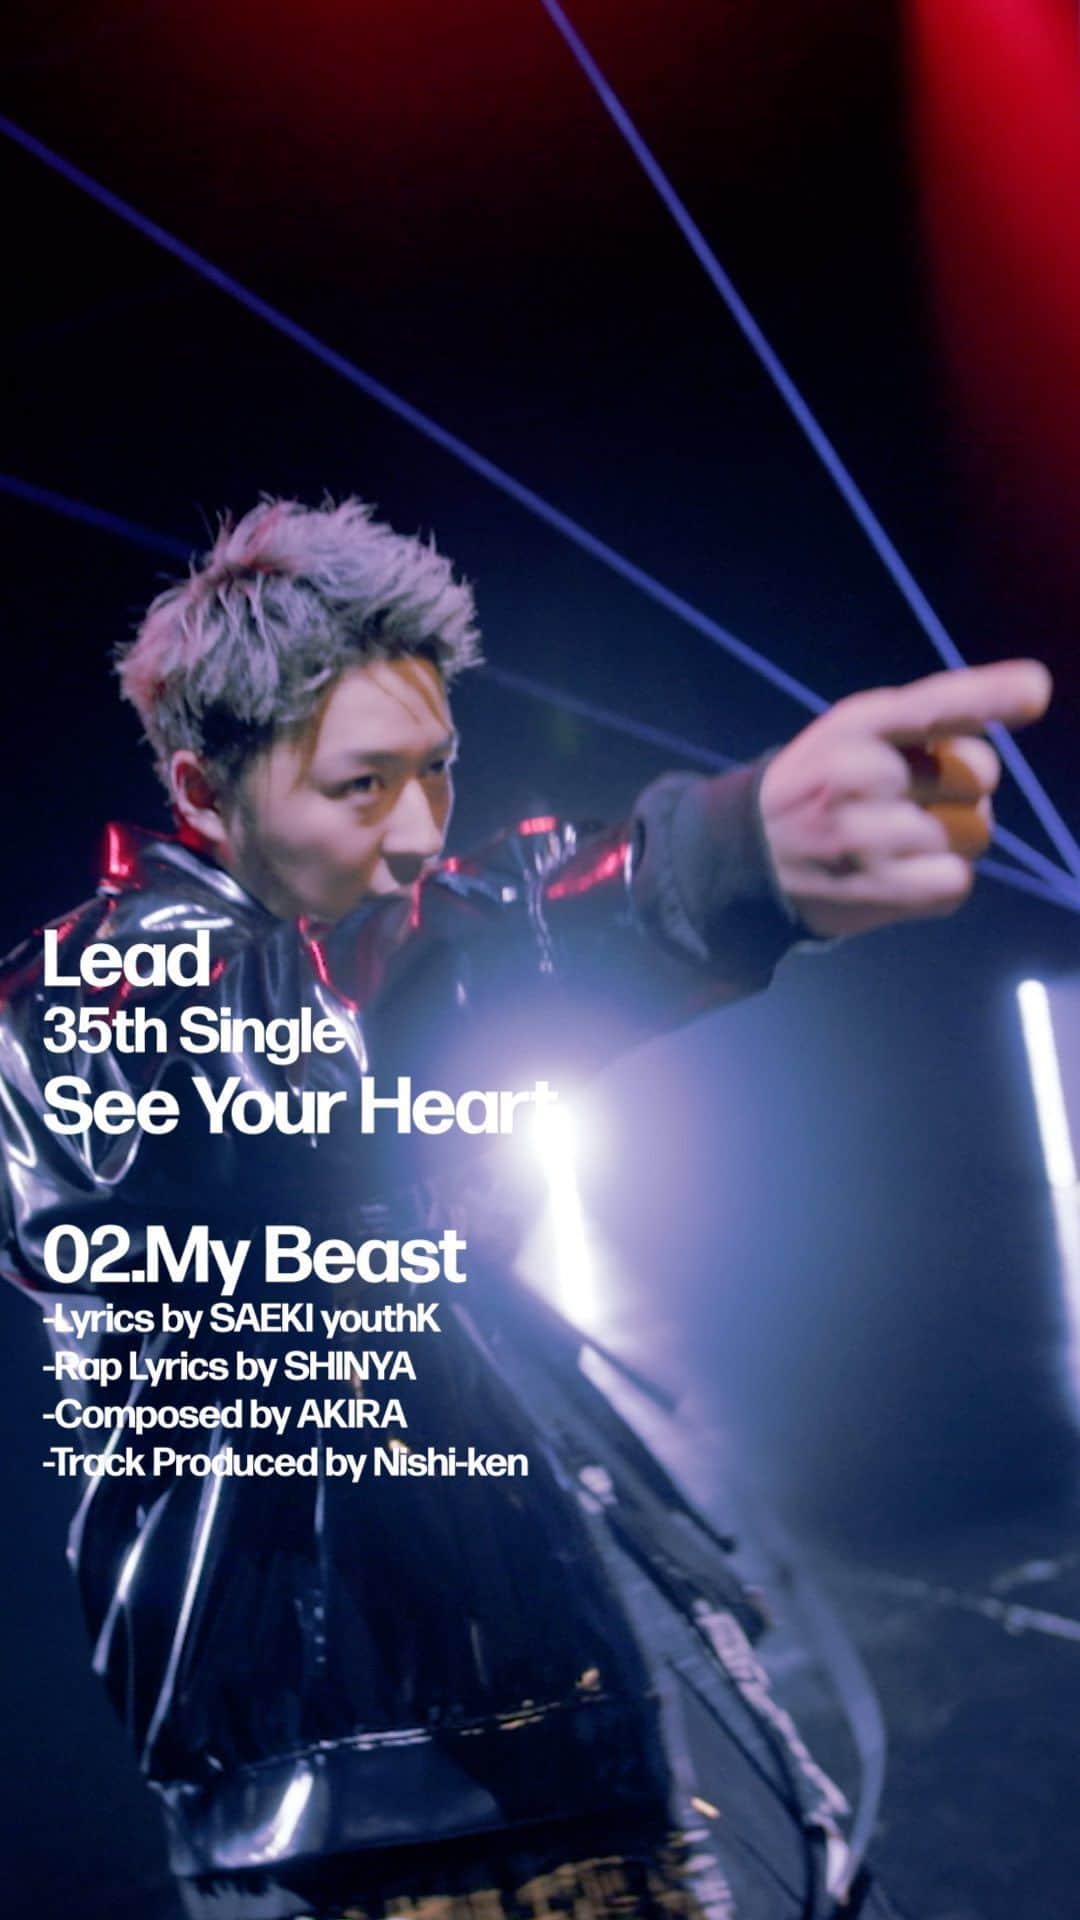 Lead【公式】のインスタグラム：「2023.05.24 Release New Single 「See Your Heart」 01. See Your Heart 02. My Beast 03. Higher Love  『02. My Beast』 -Lyrics by SAEKI youthK -Rap Lyrics by SHINYA -Composed by AKIRA -Track Produced by nishi-ken  #Lead #SeeYourHeart #あっつい」